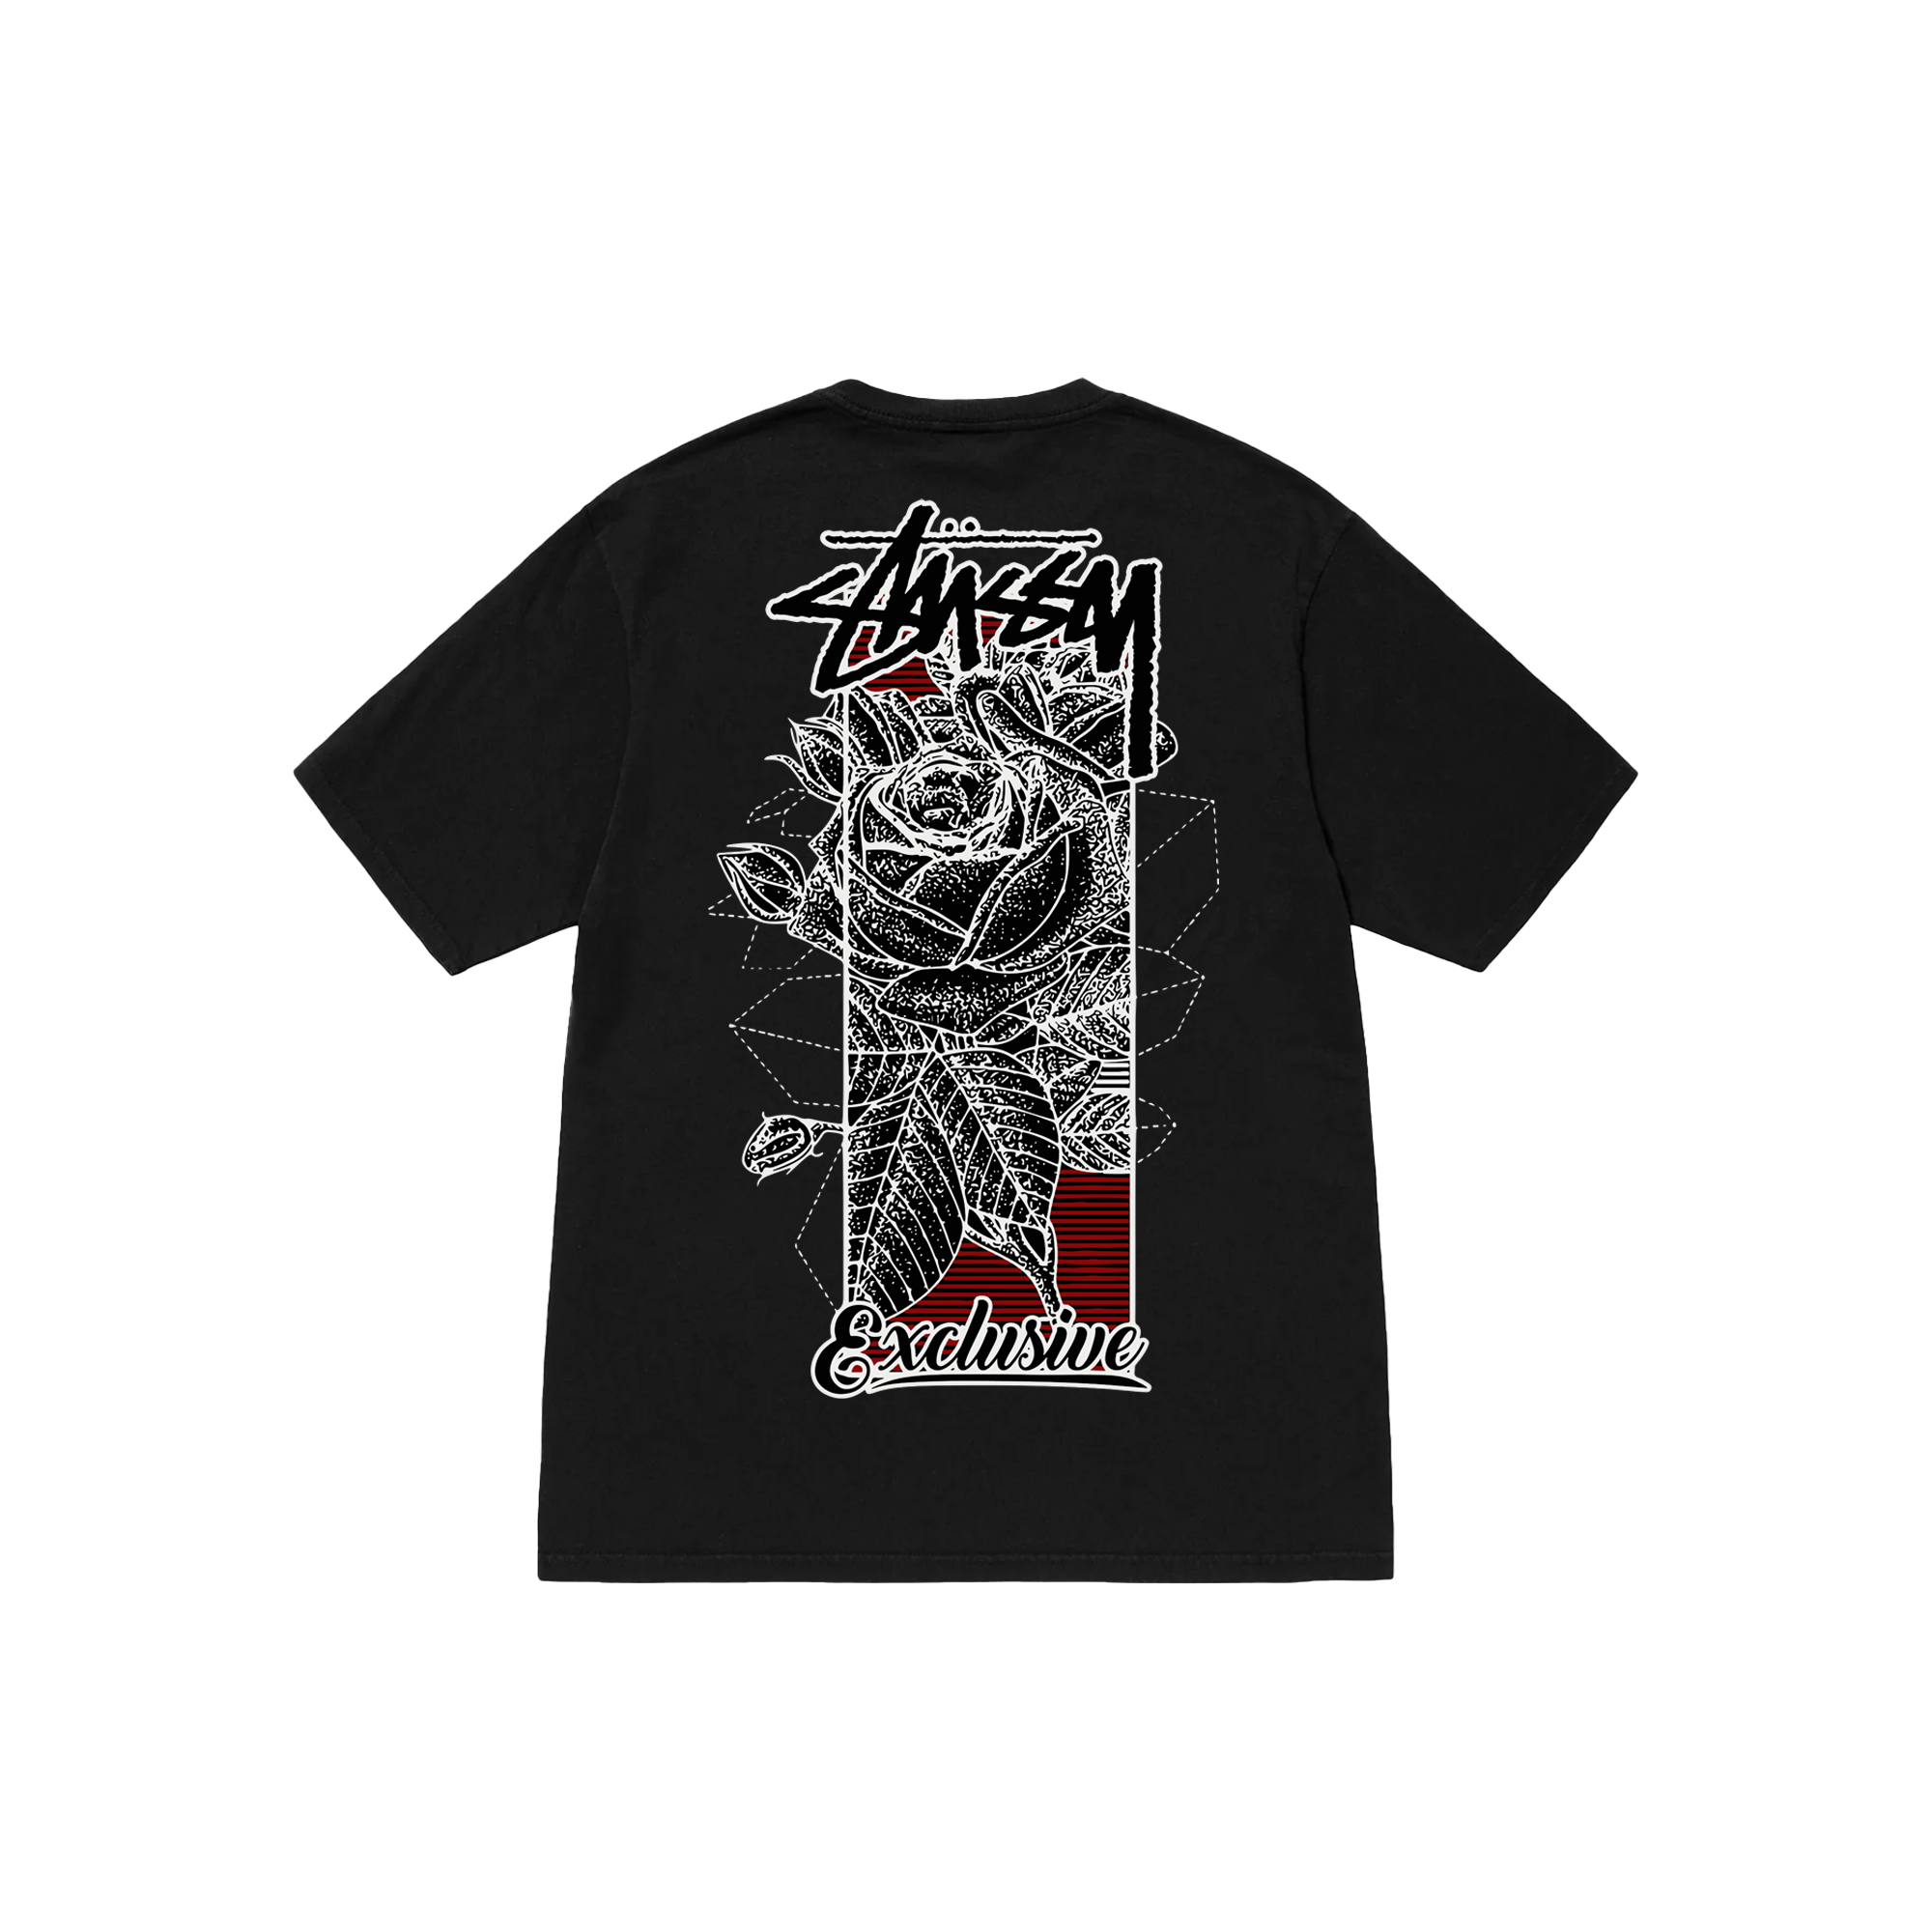 Stussy Floral Exclusive T-Shirt